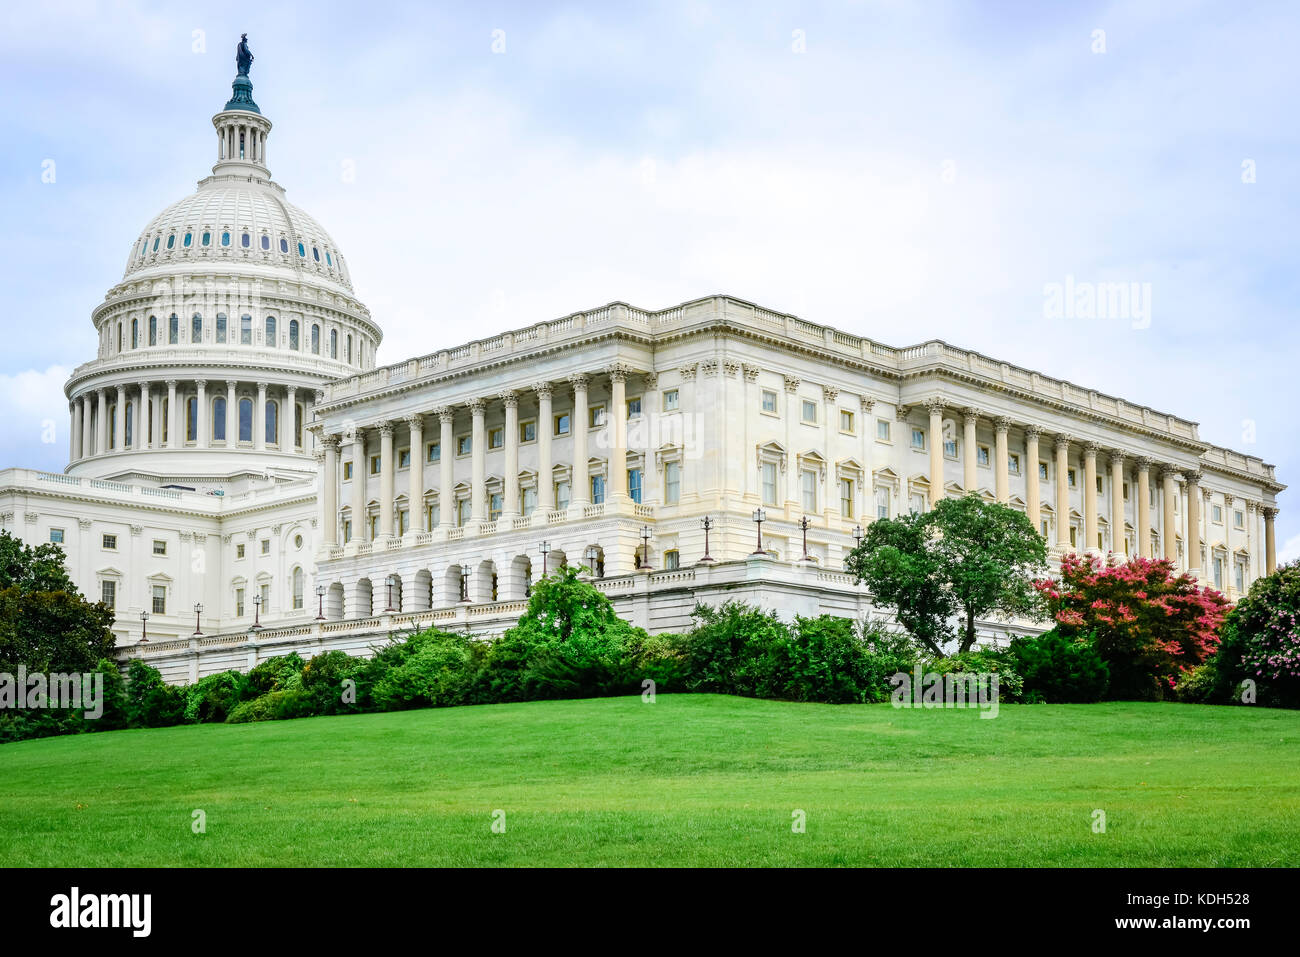 The Domed Neoclassically styled US Capitol Building viewed towards the East Side, in Washington, DC, USA Stock Photo